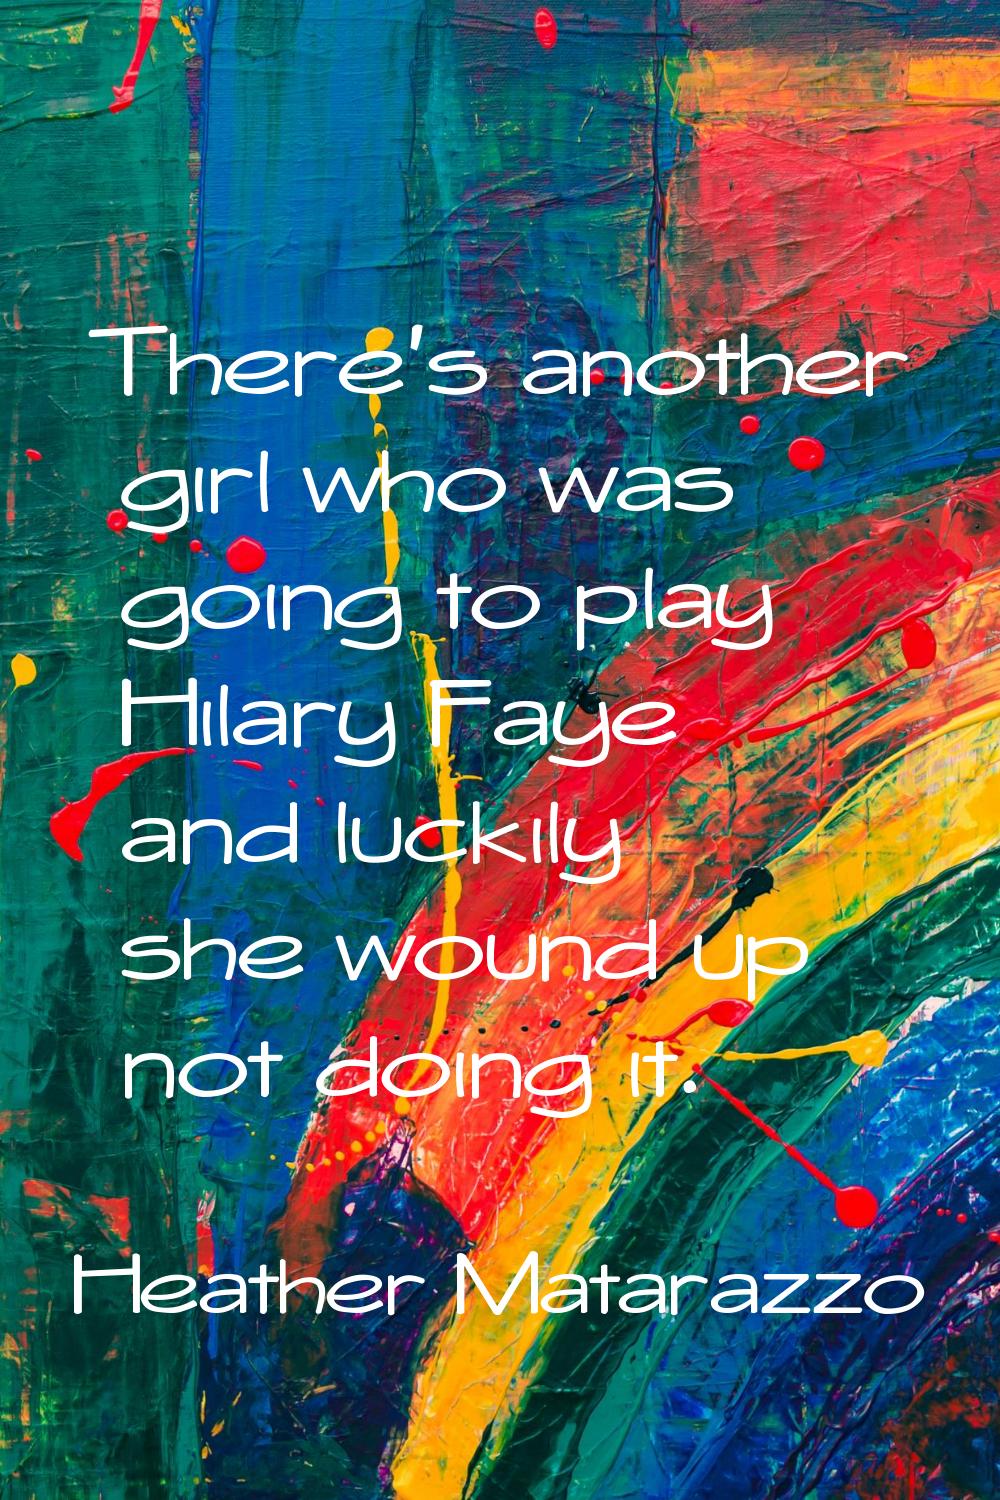 There's another girl who was going to play Hilary Faye and luckily she wound up not doing it.